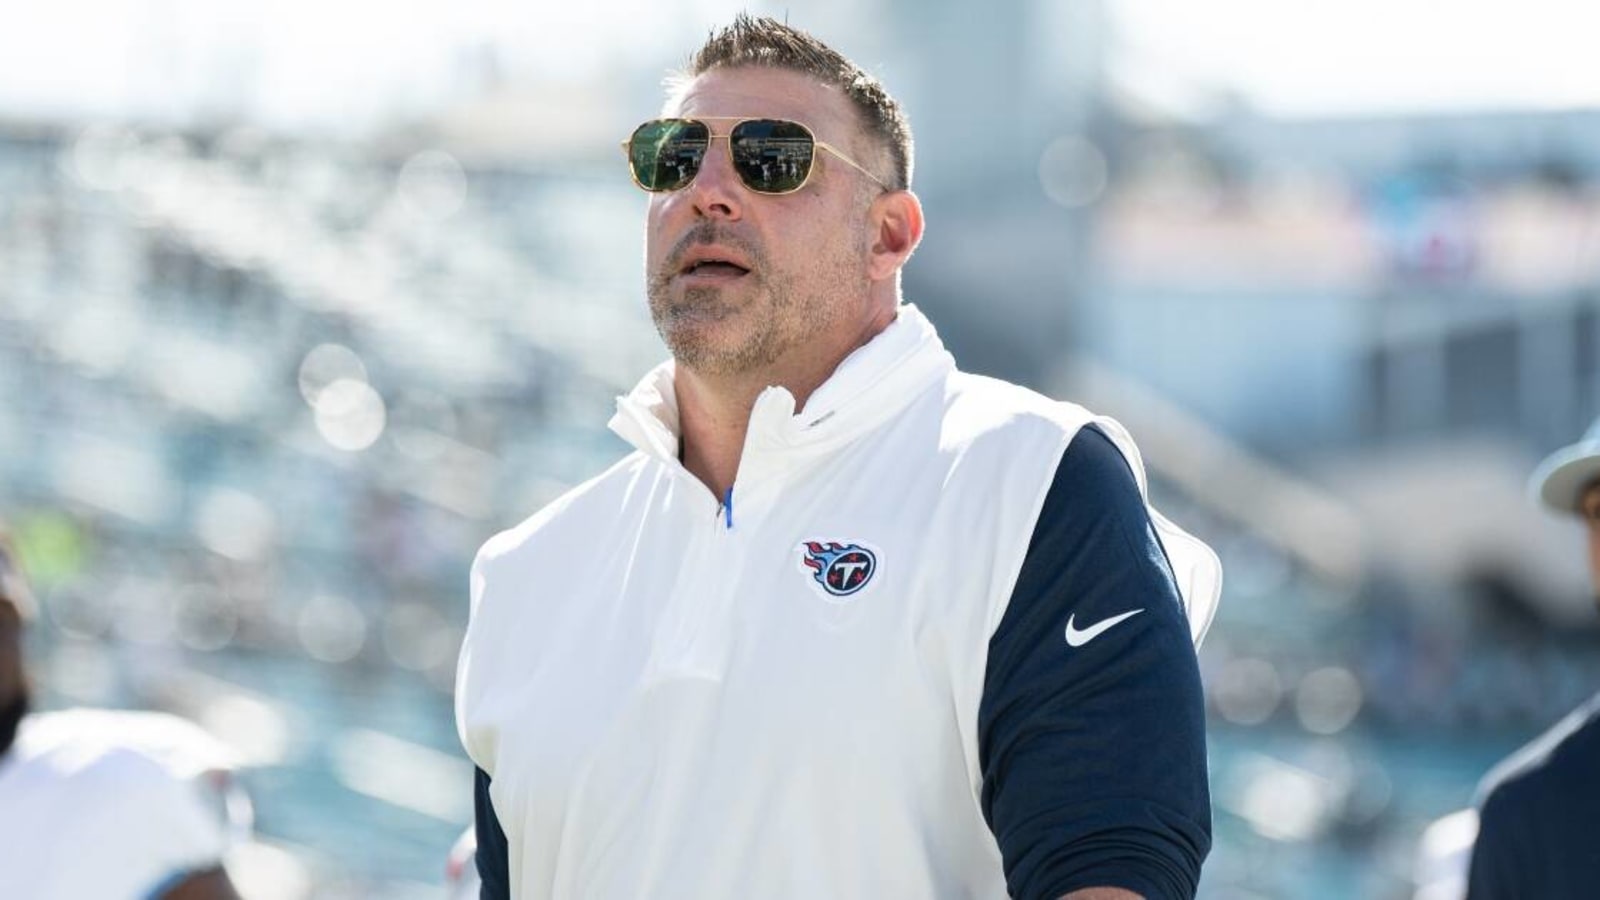 Report: NFL GM suggested Mike Vrabel being ‘very large’ hurt his job prospects